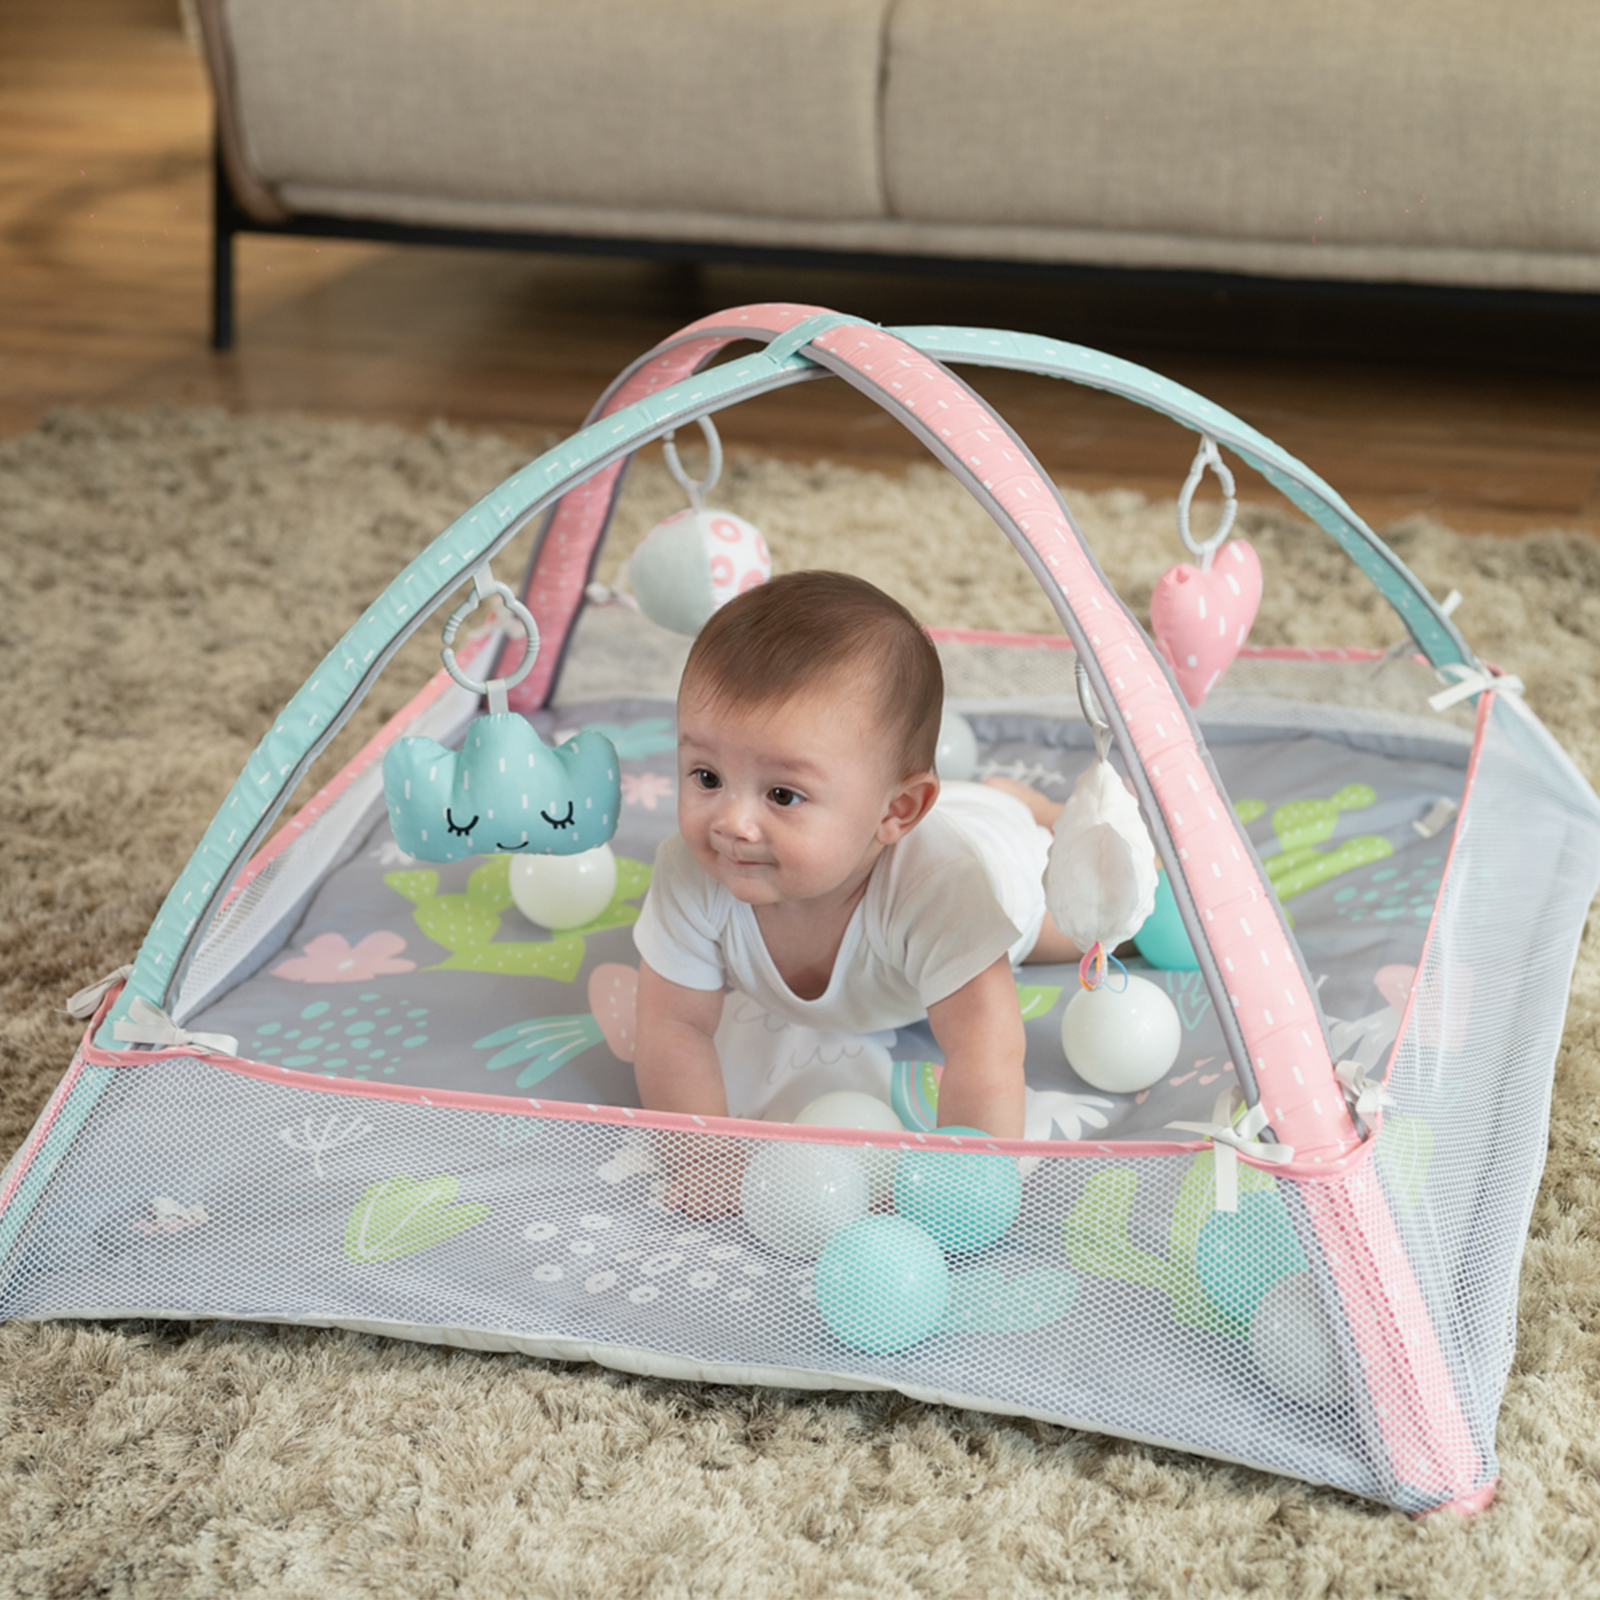 Ladida 2in1 Activity Baby Playmat Gym and Ball Pit (From Birth to 6 Months) - Grey